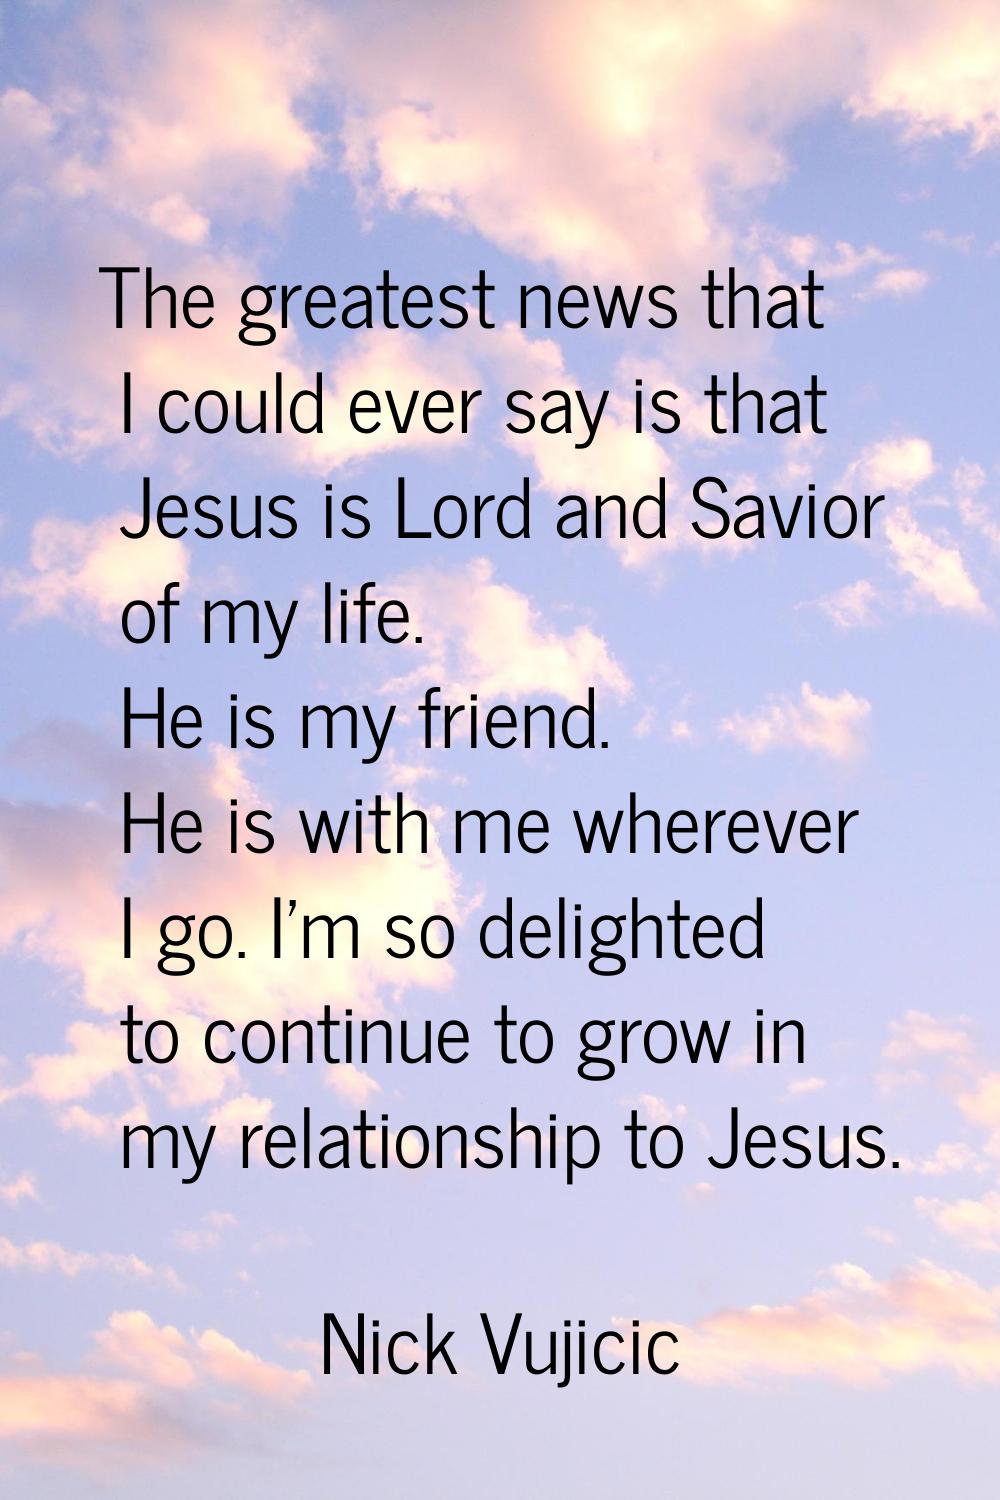 The greatest news that I could ever say is that Jesus is Lord and Savior of my life. He is my frien